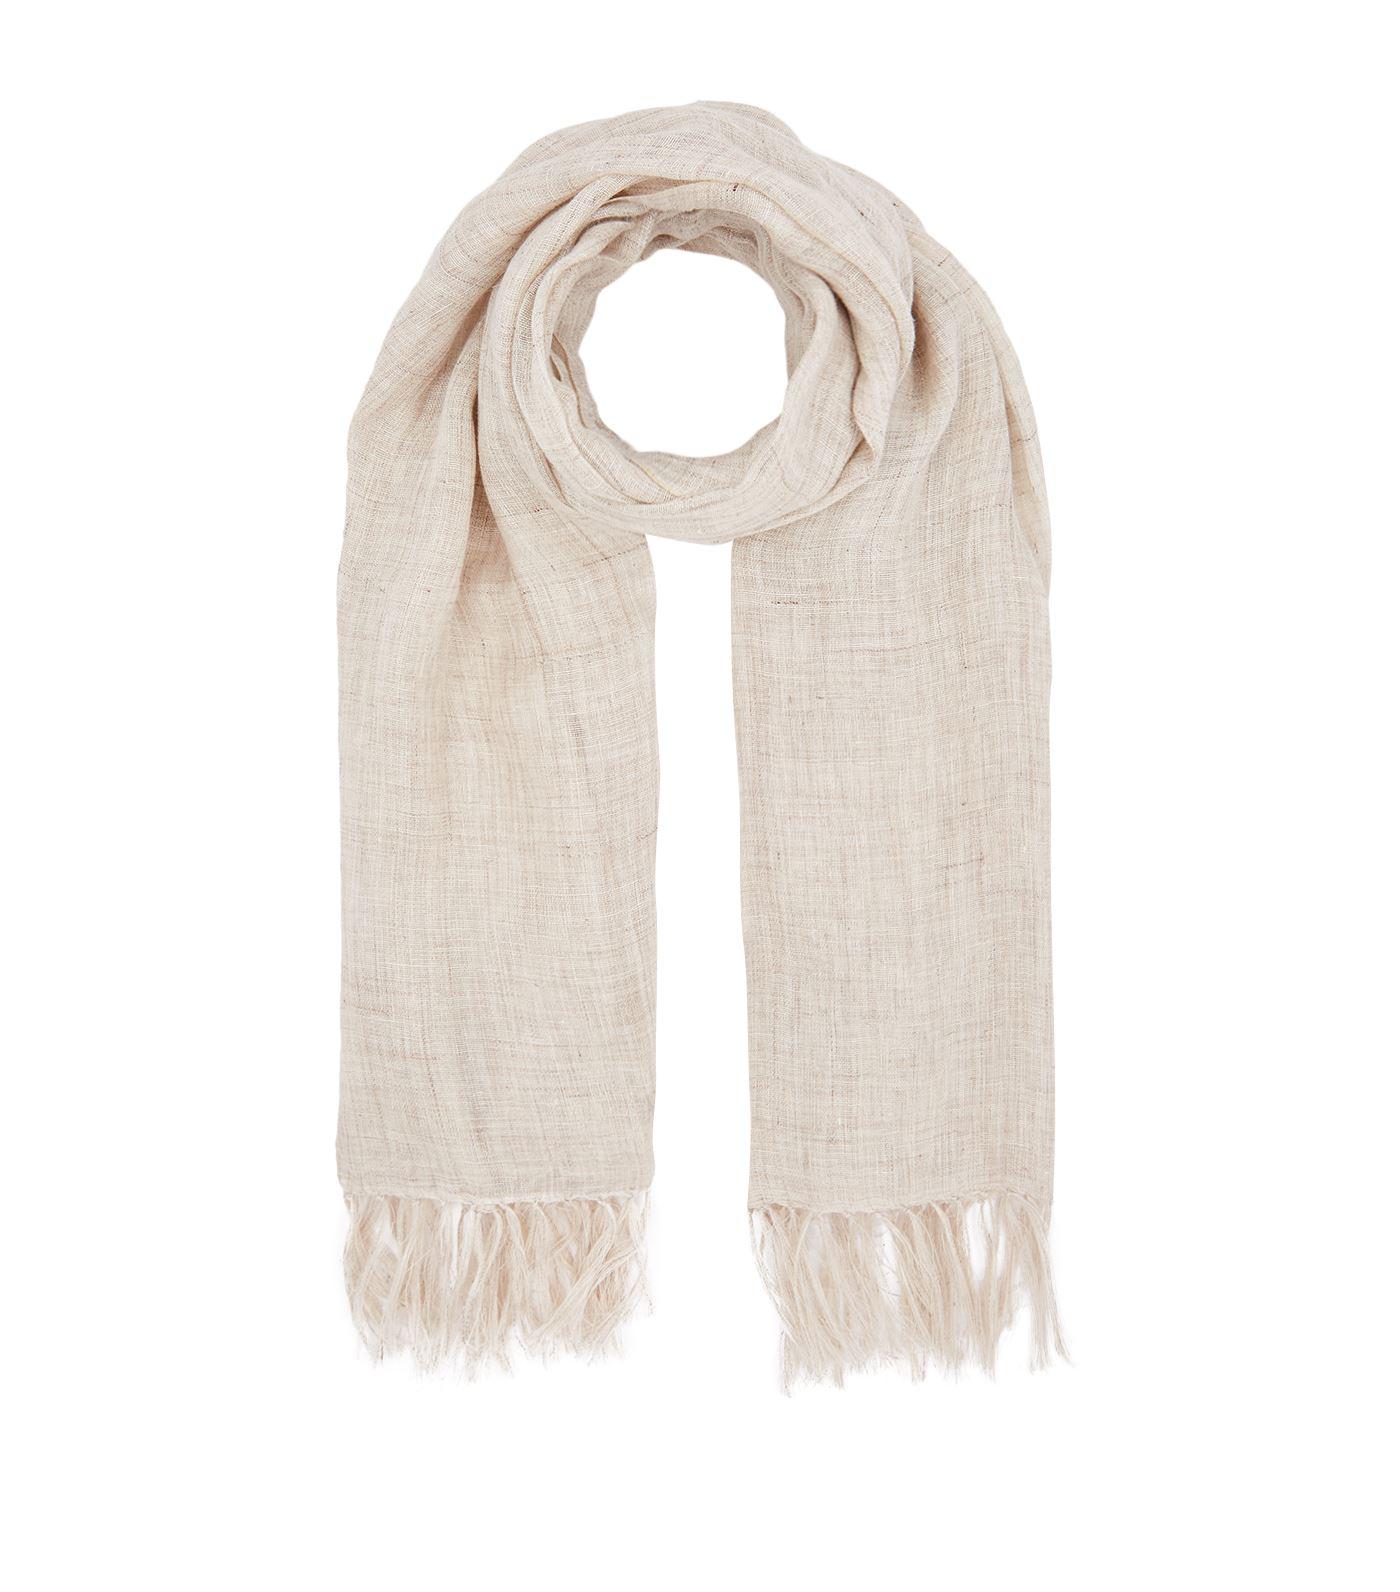 Max Mara Fringed Linen Scarf in Beige (Natural) - Lyst